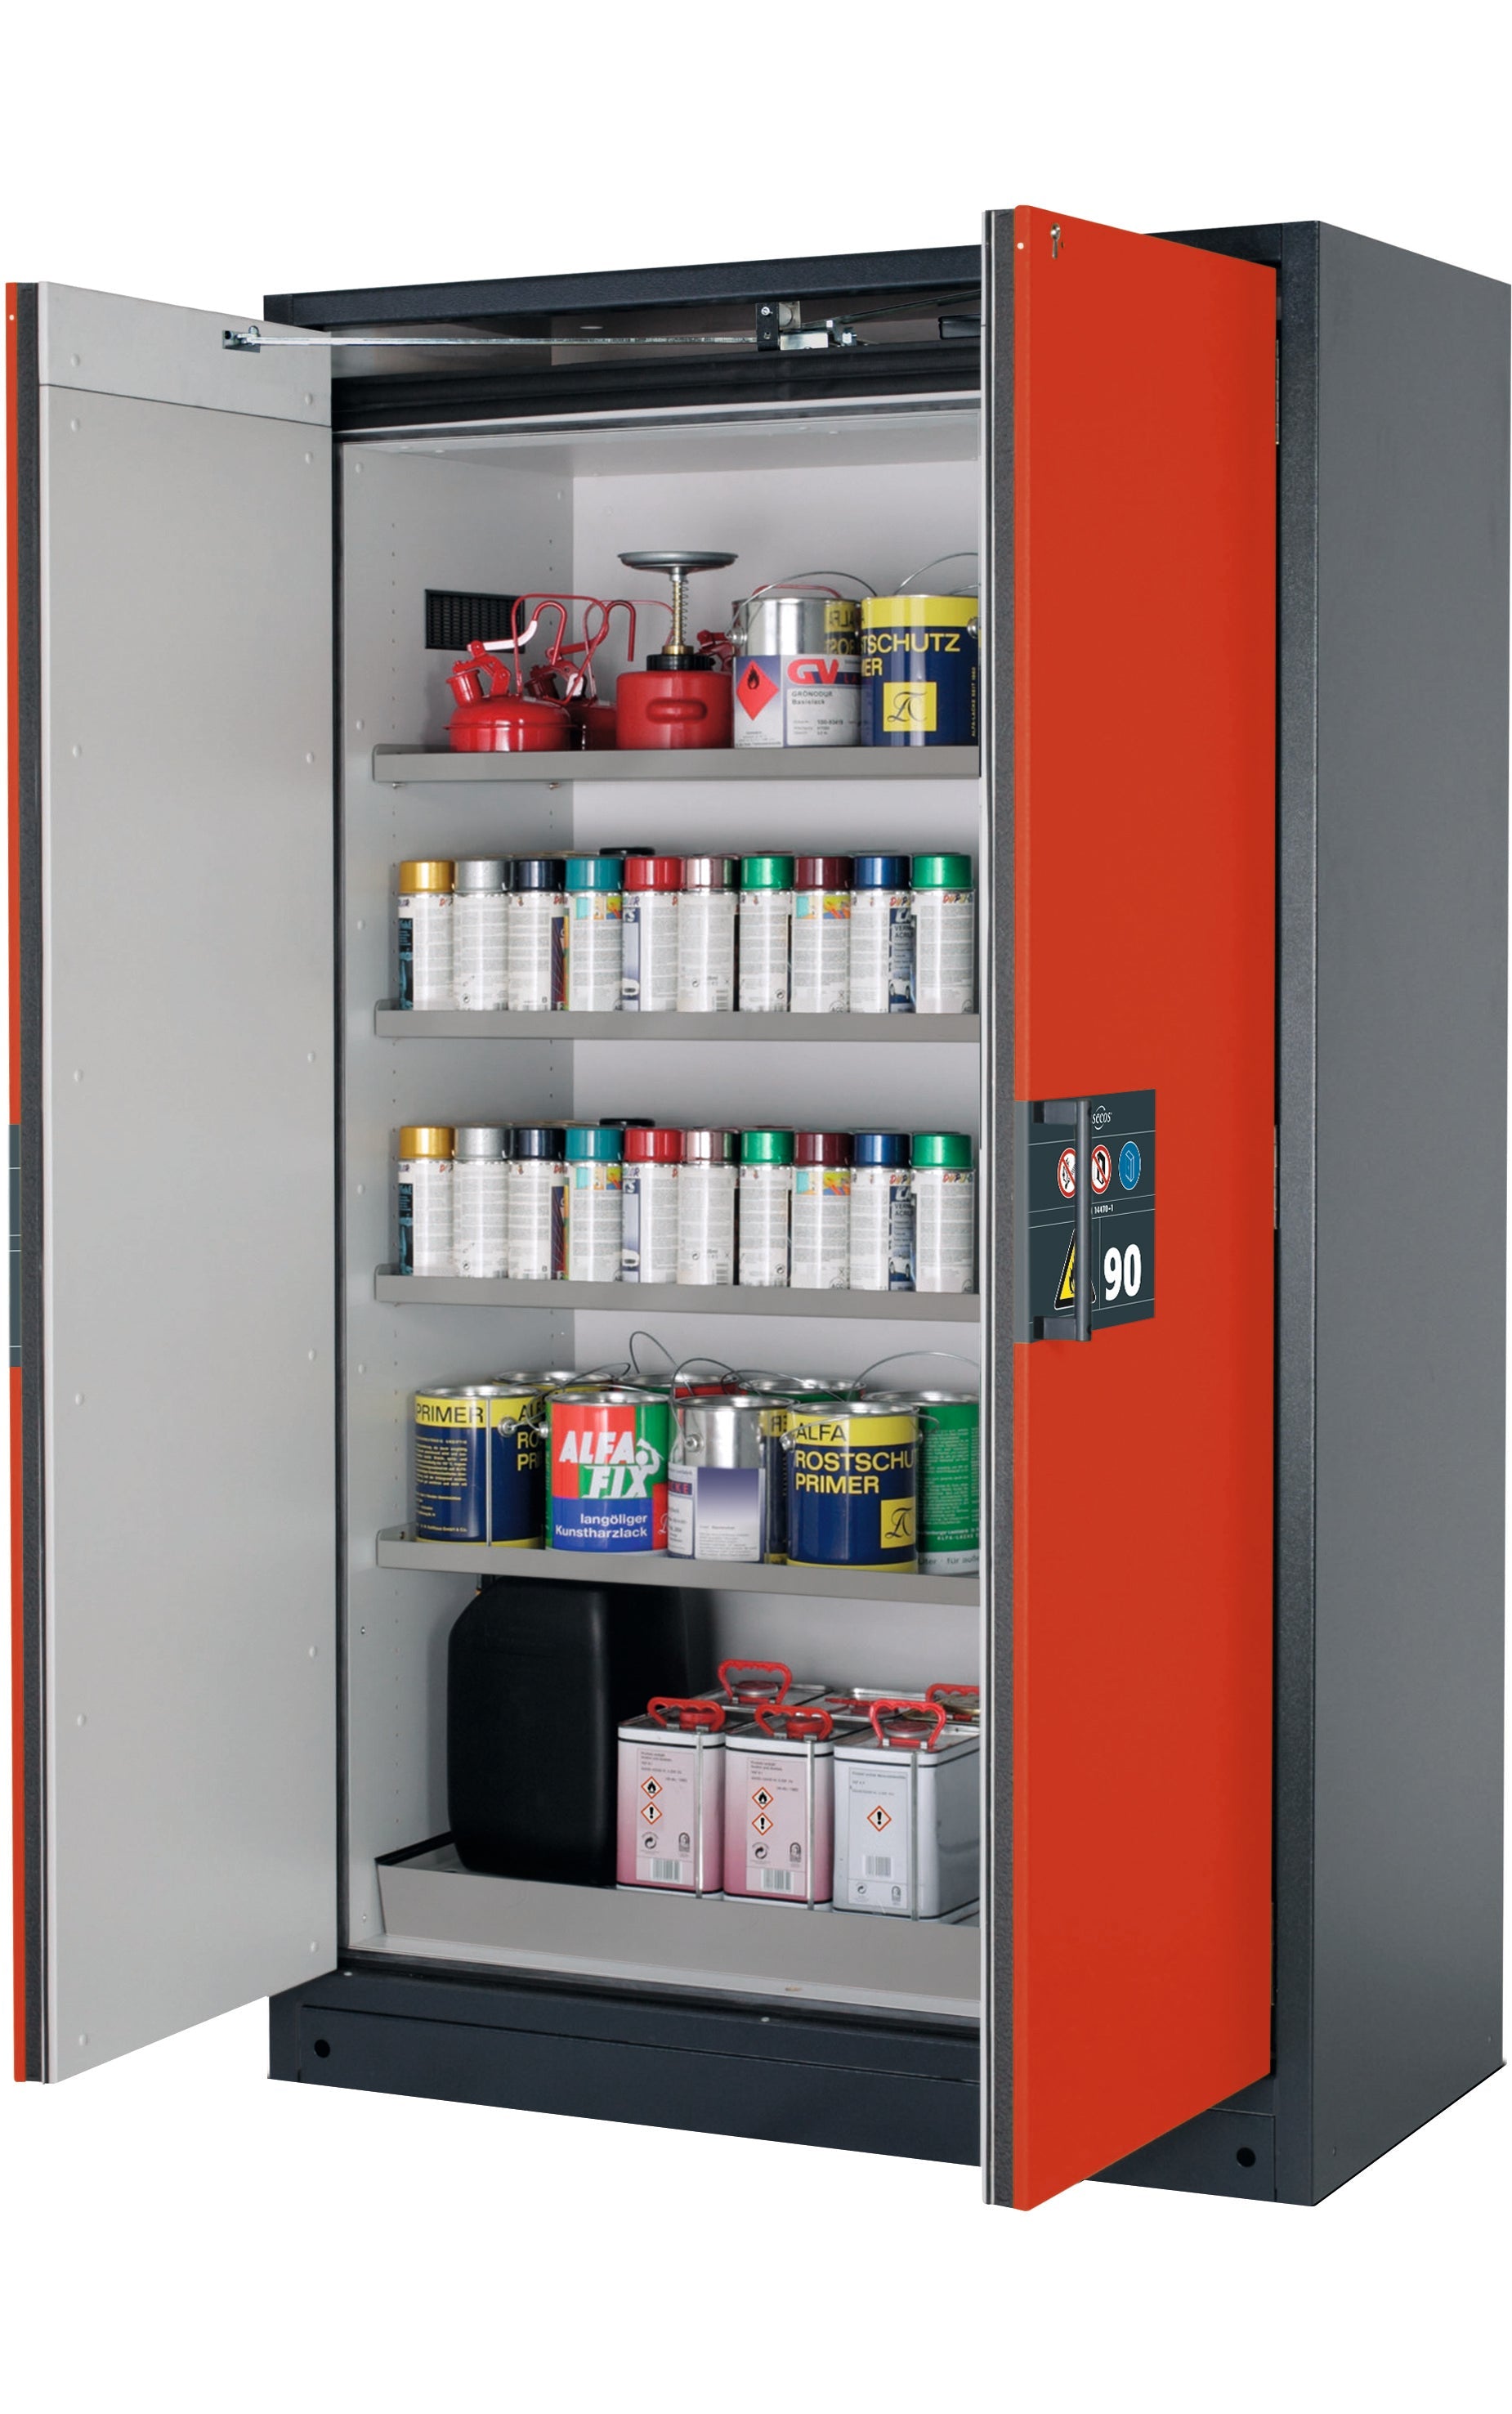 Type 90 safety storage cabinet Q-PEGASUS-90 model Q90.195.120.WDAC in traffic red RAL 3020 with 4x shelf standard (stainless steel 1.4301),